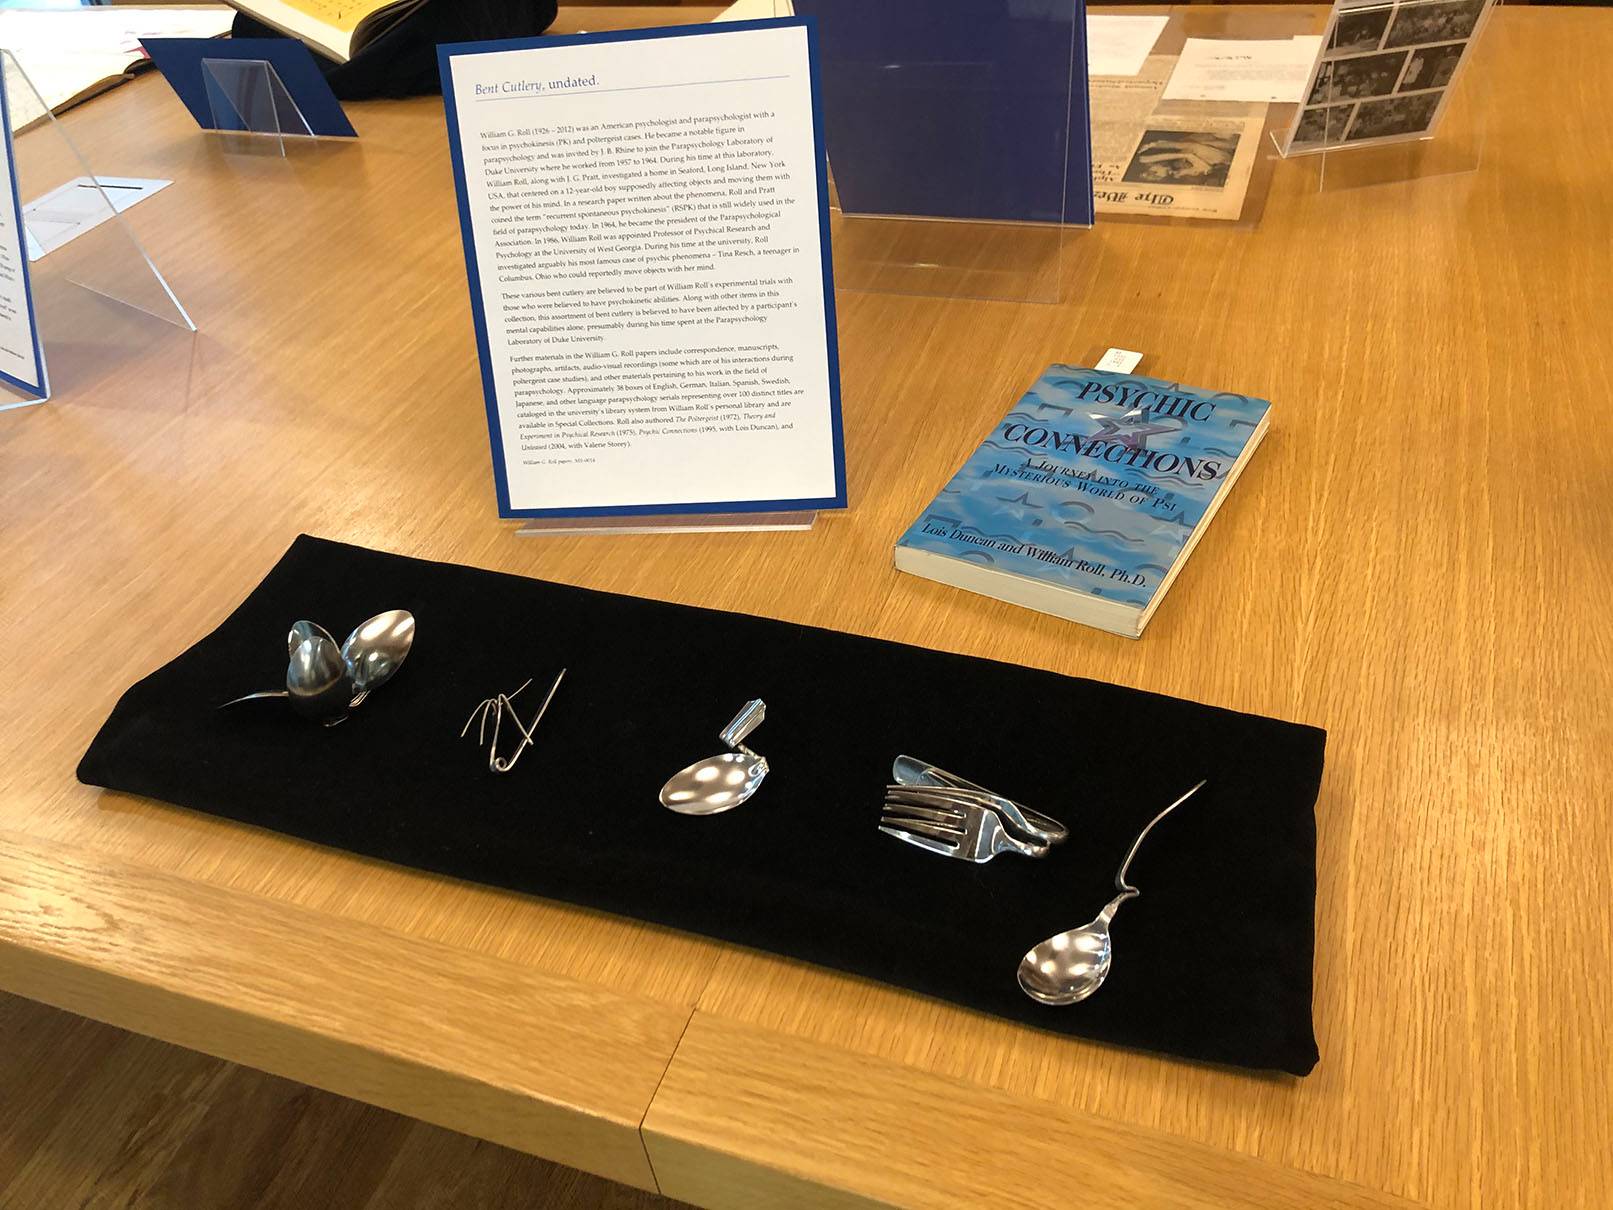 Display of bent cutlery from the William G. Roll collection